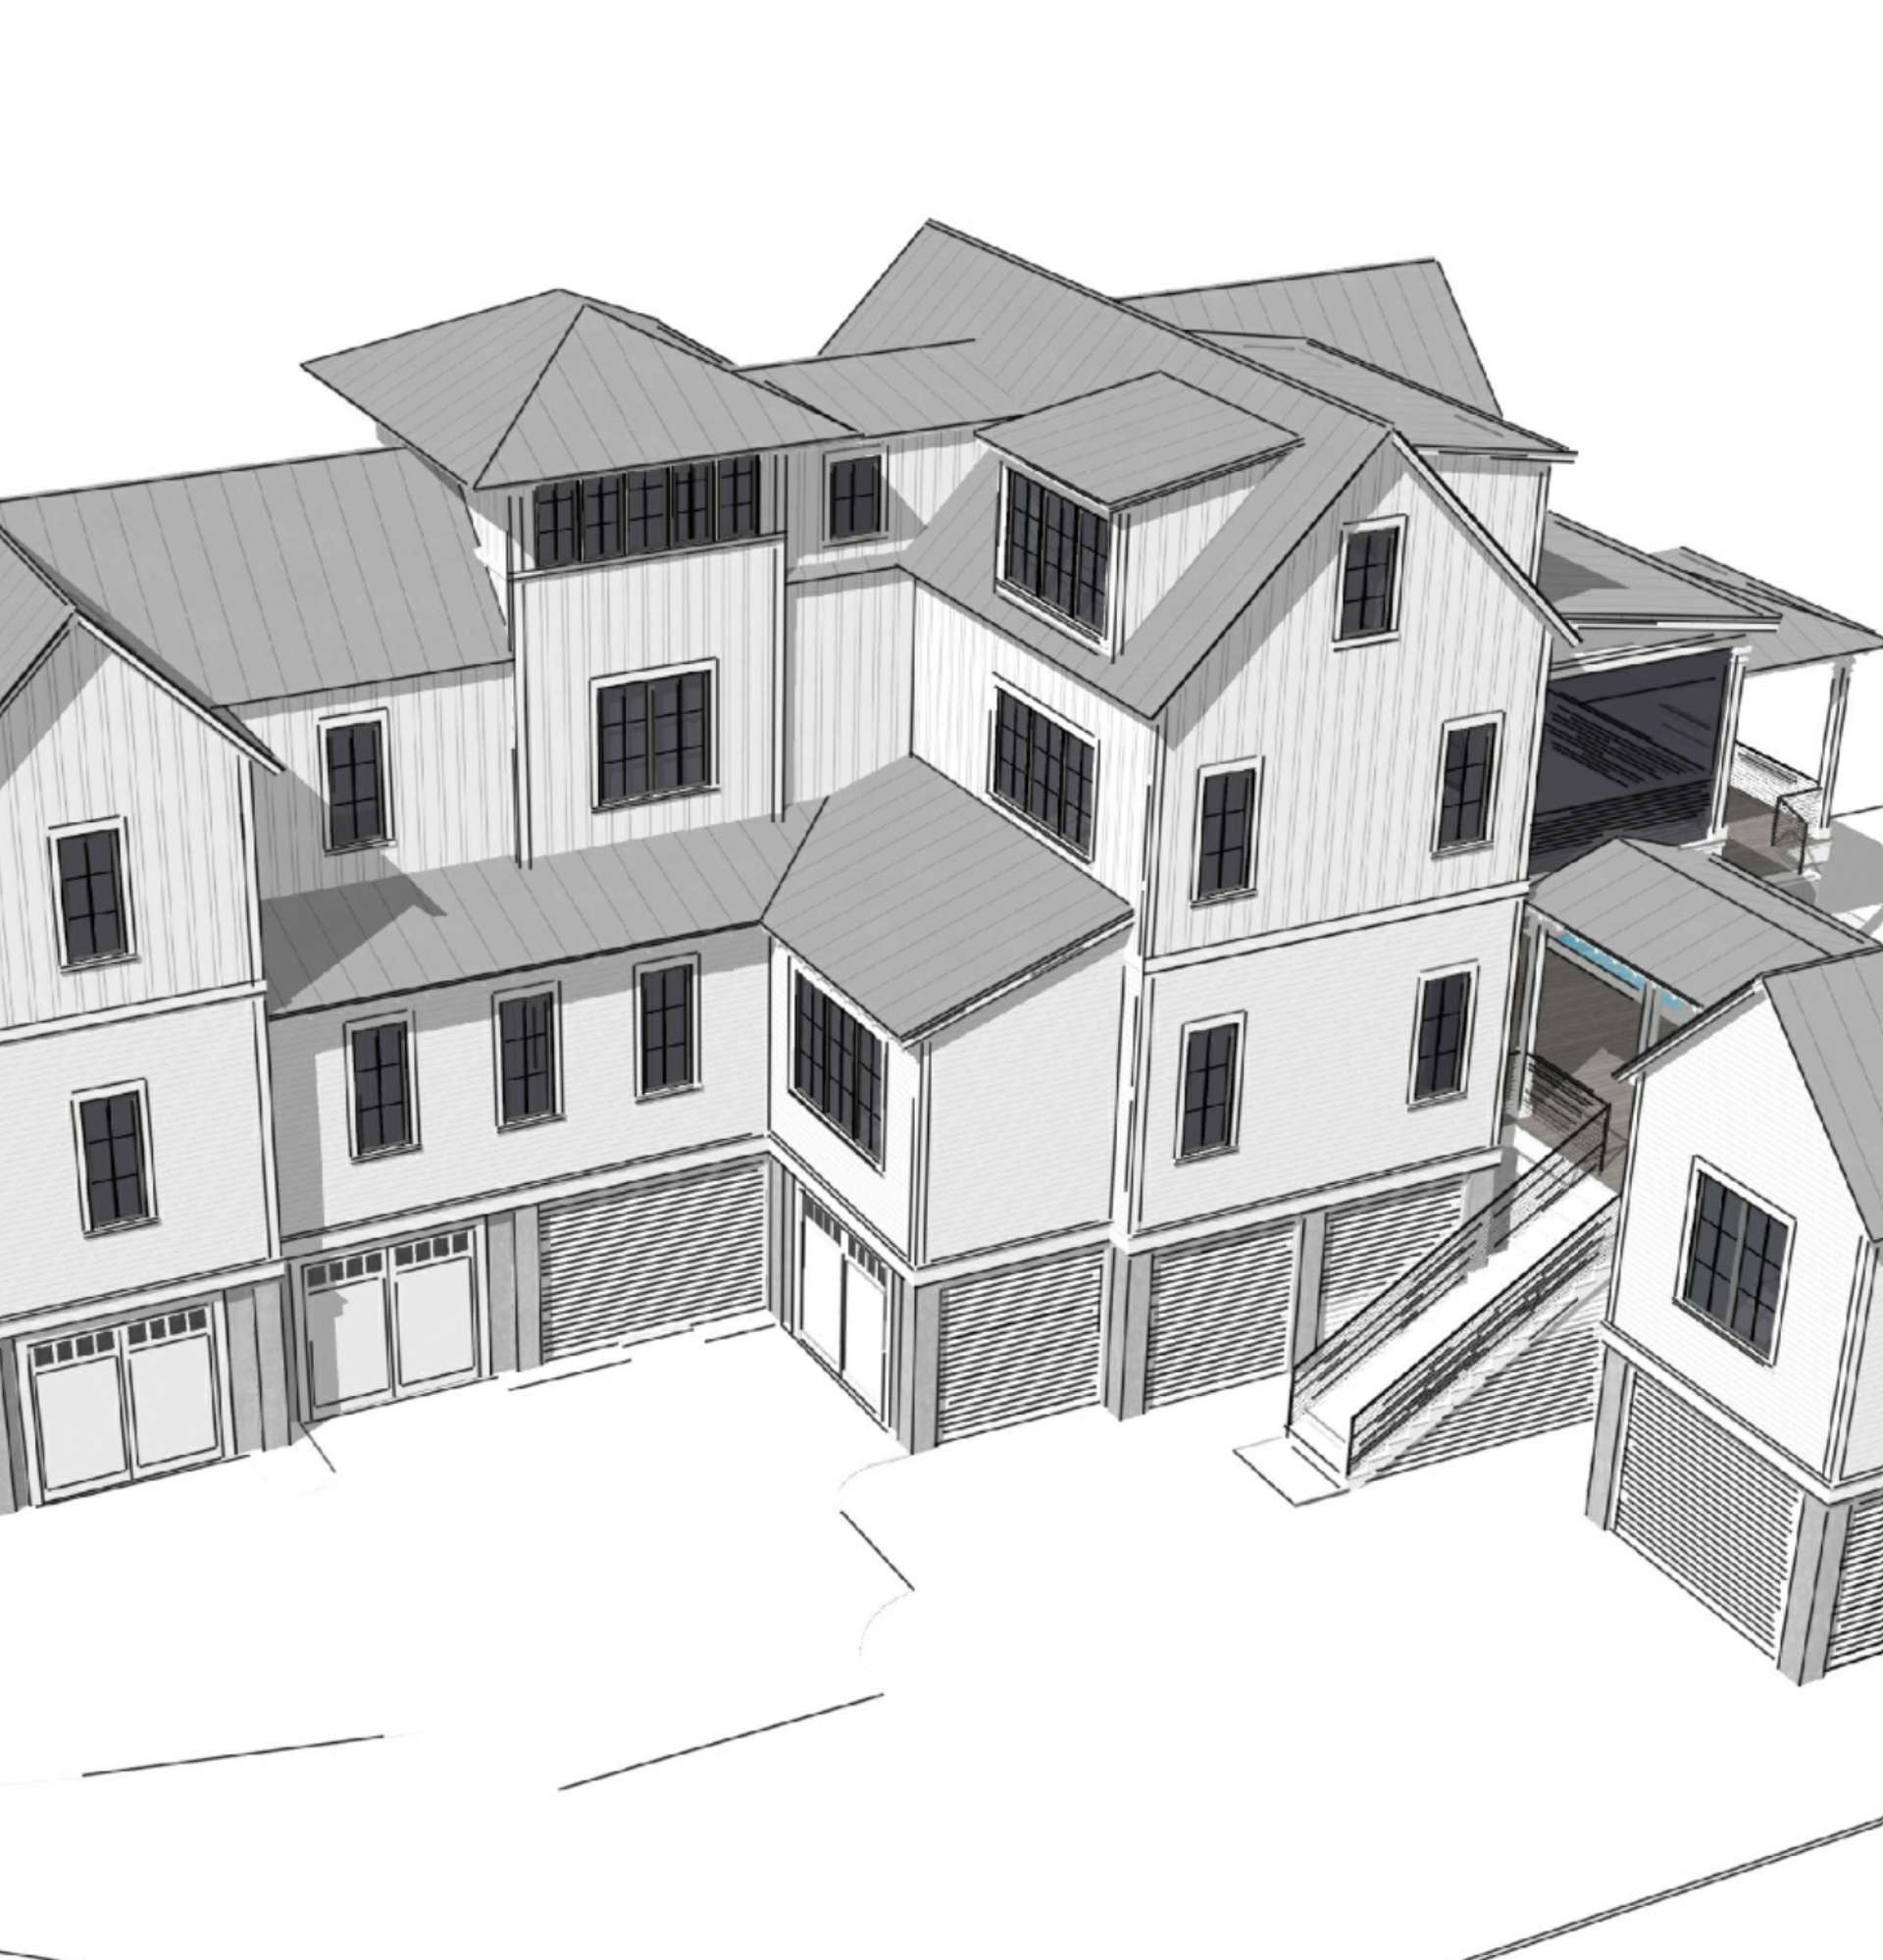 16 of 36. Home renderings are to act as aid in lot visualization. Only lot for sale.